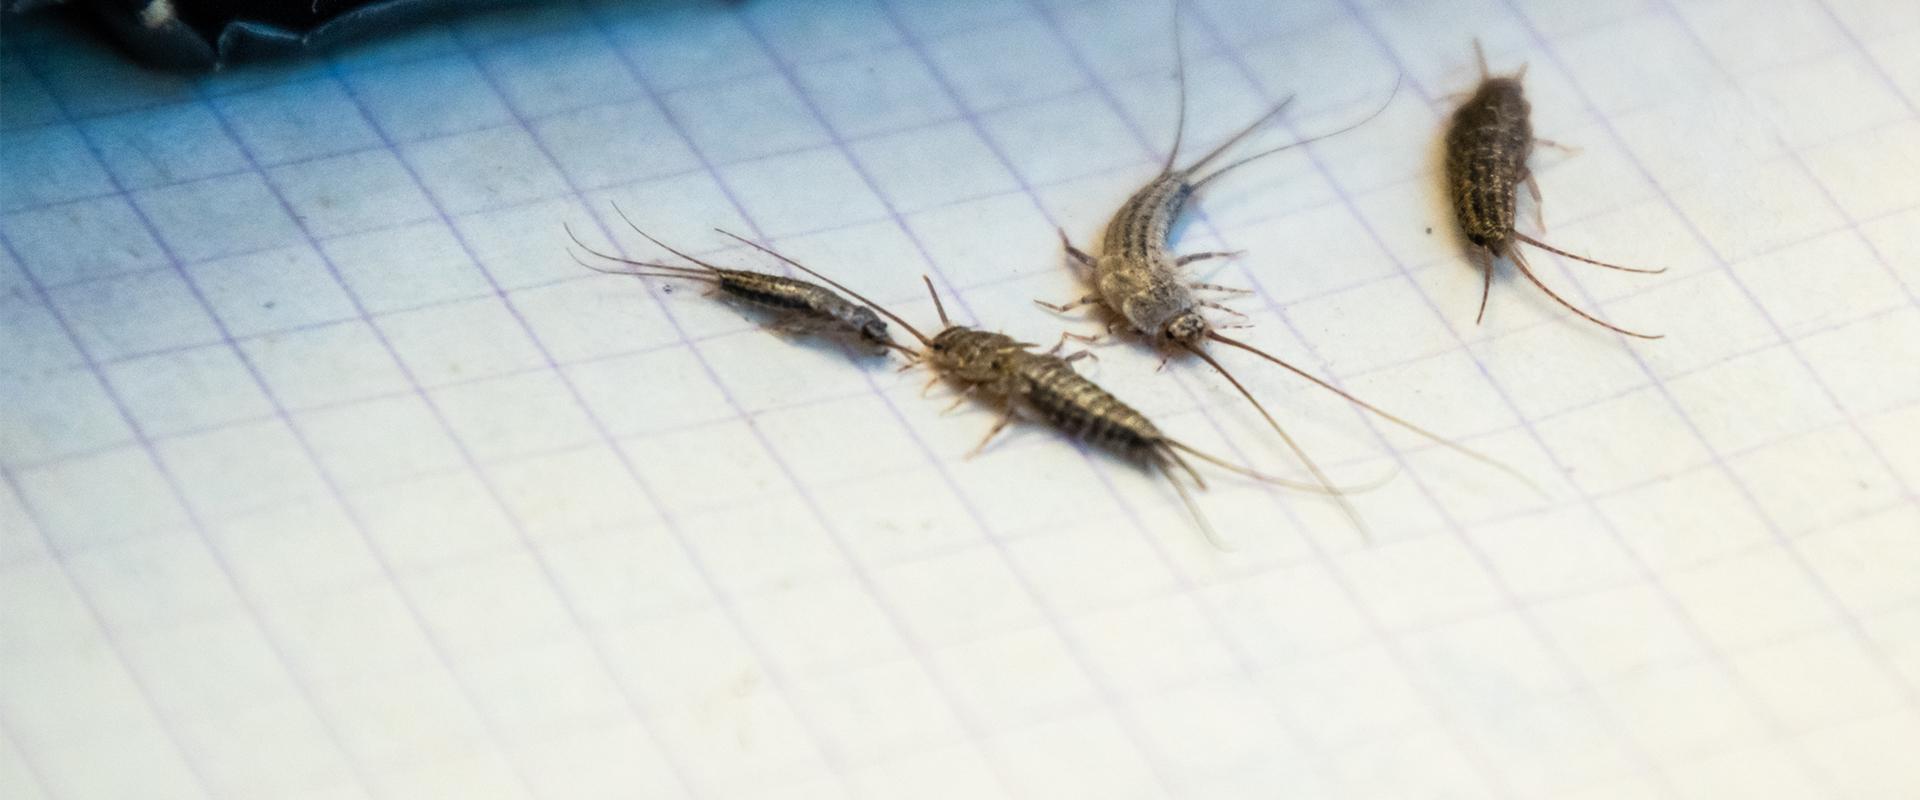 four silverfish on a piece of graph paper